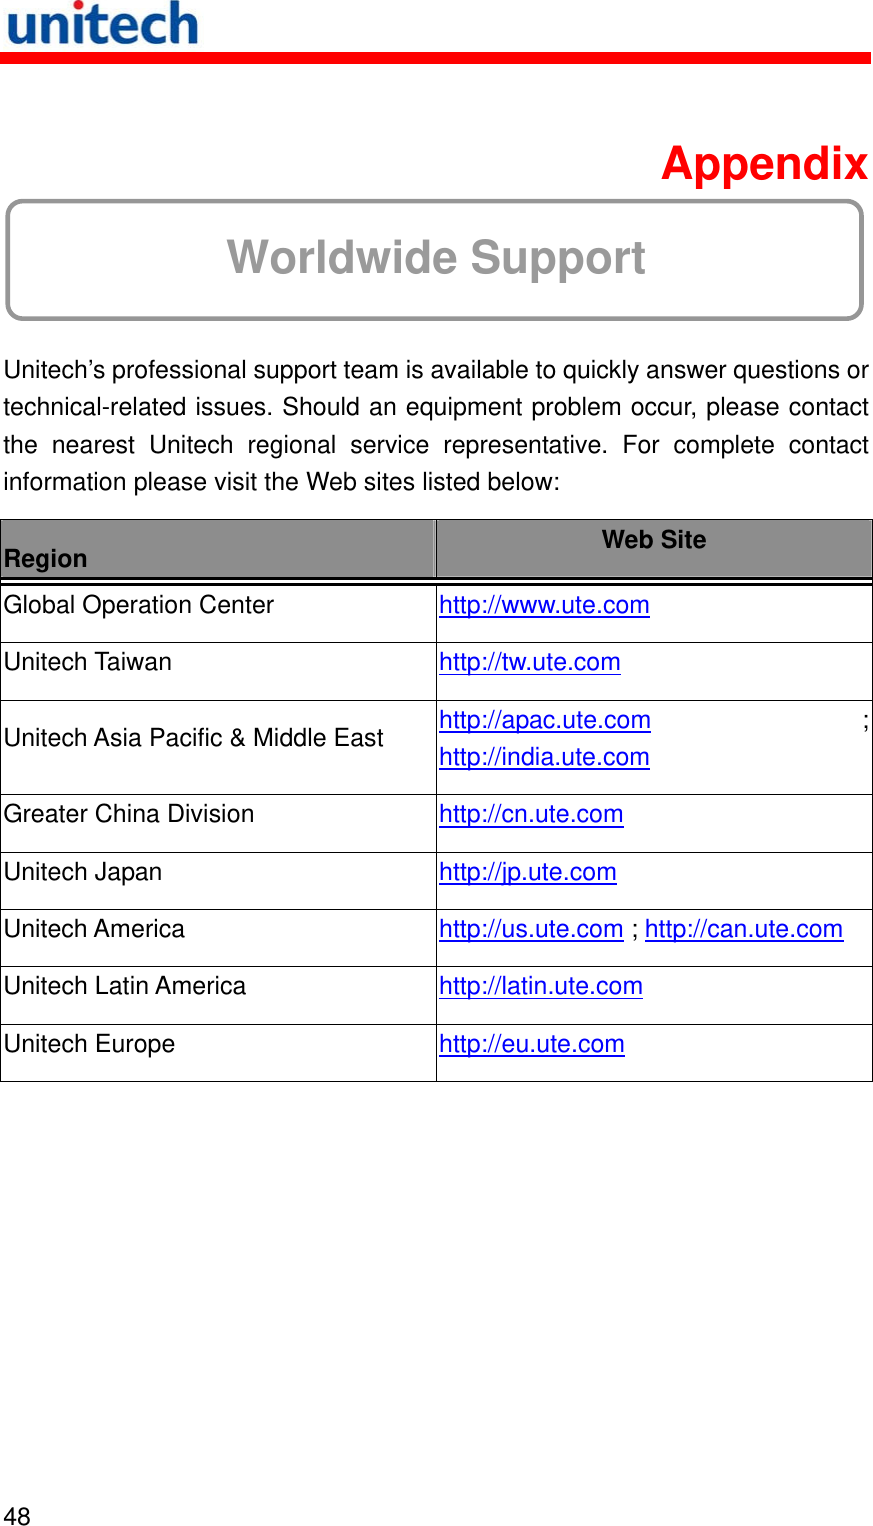   48   Appendix  Worldwide Support  Unitech’s professional support team is available to quickly answer questions or technical-related issues. Should an equipment problem occur, please contact the nearest Unitech regional service representative. For complete contact information please visit the Web sites listed below: Region  Web Site Global Operation Center  http://www.ute.com  Unitech Taiwan  http://tw.ute.com  Unitech Asia Pacific &amp; Middle East  http://apac.ute.com ; http://india.ute.com  Greater China Division  http://cn.ute.com  Unitech Japan  http://jp.ute.com  Unitech America  http://us.ute.com ; http://can.ute.com Unitech Latin America  http://latin.ute.com  Unitech Europe  http://eu.ute.com   